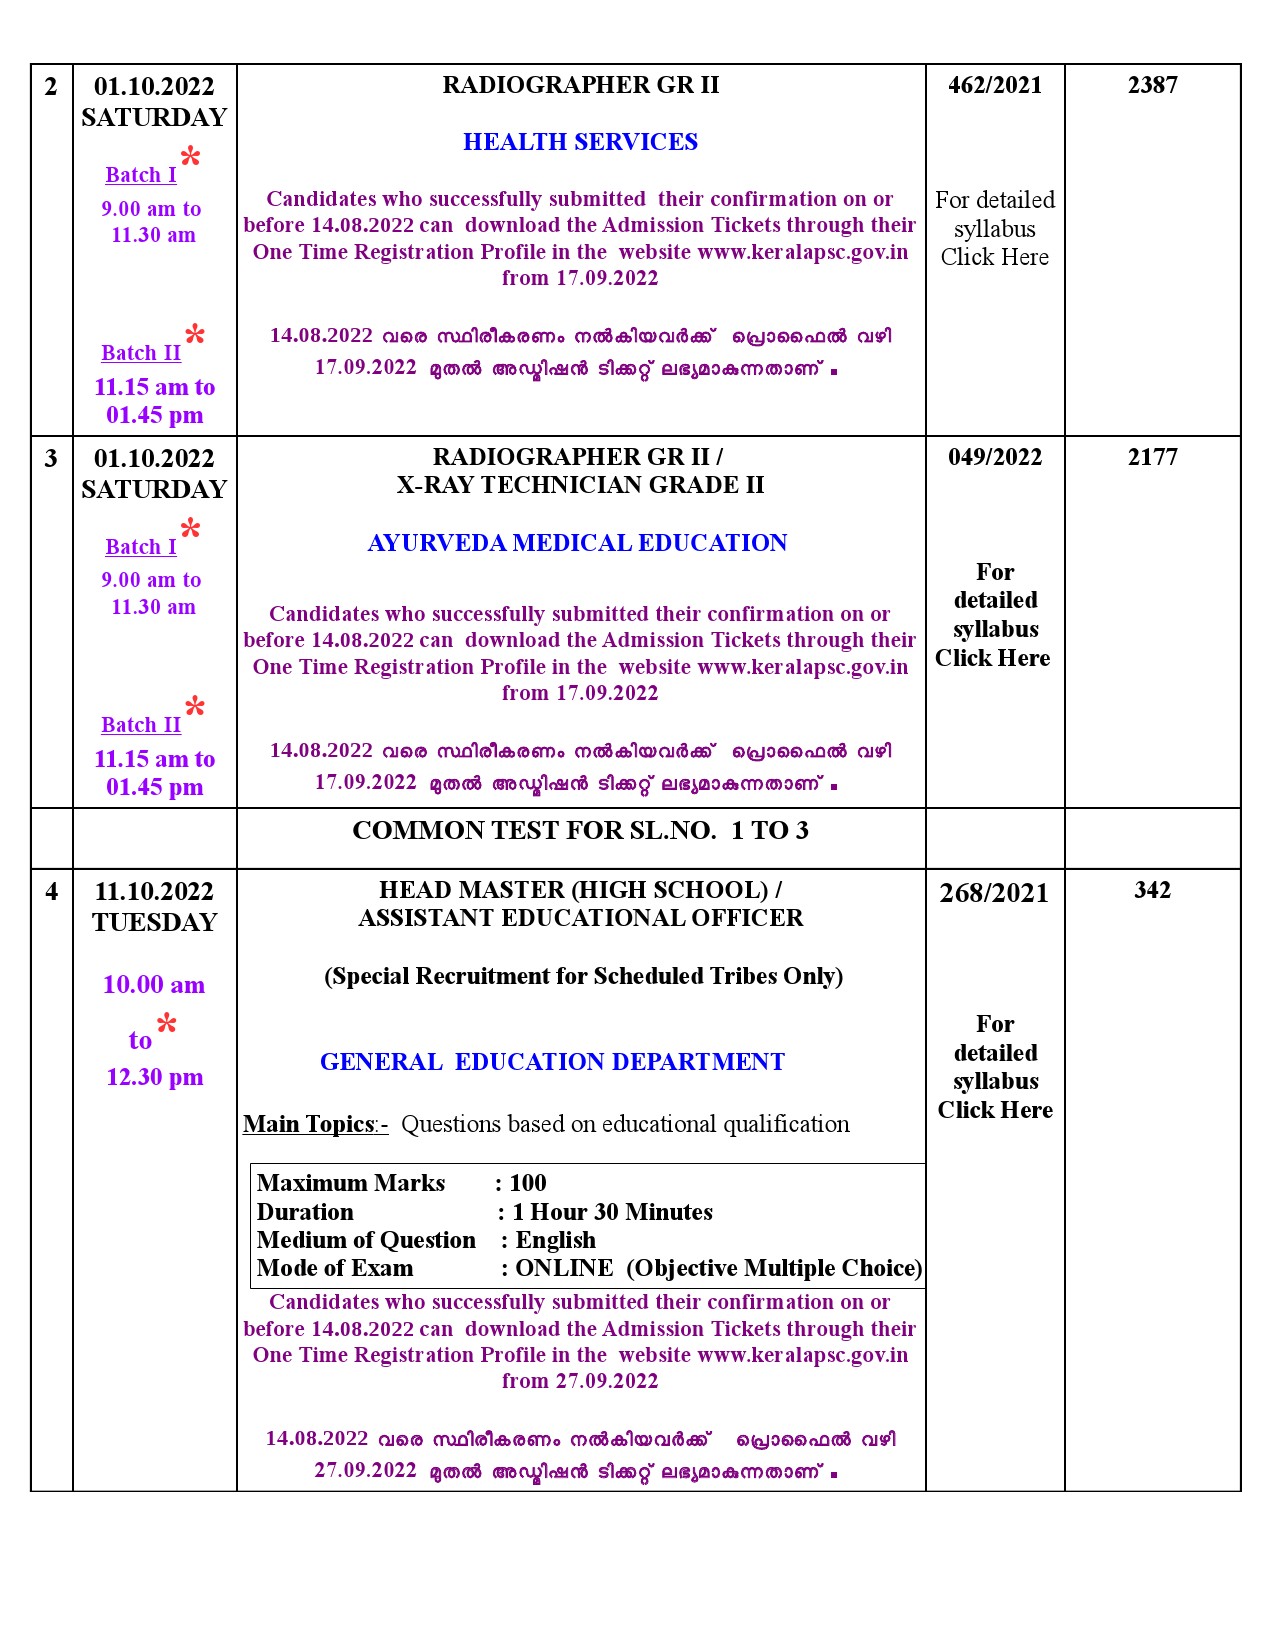 Examination Programme For The Month Of October 2022 - Notification Image 2